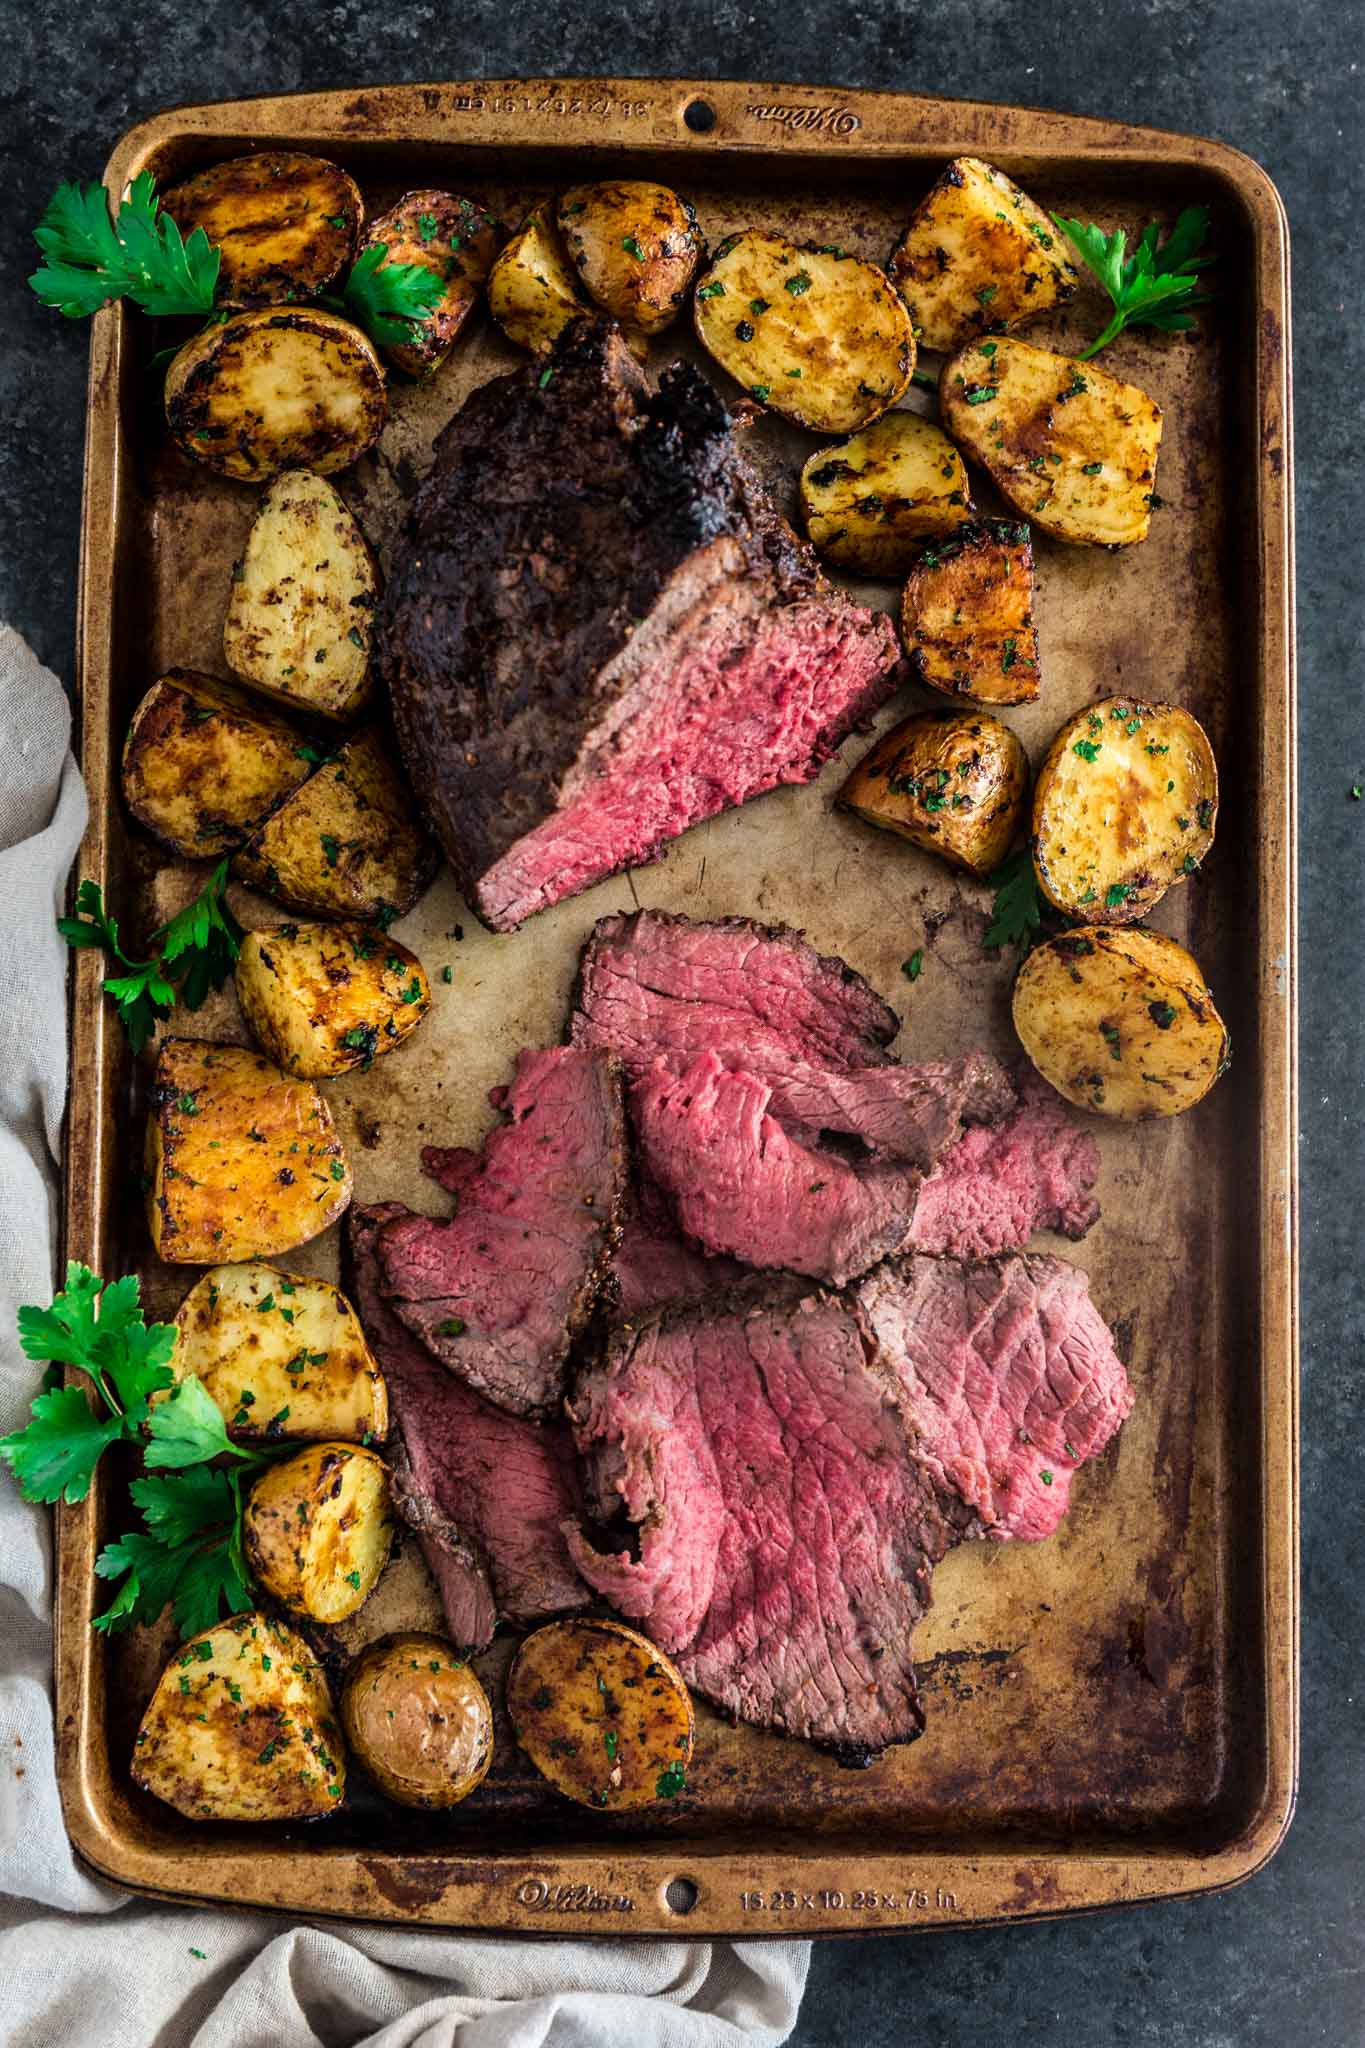 Balsamic Mustard Roast Beef | www.oliviascuisine.com | No holiday table is complete without a beautiful centerpiece roast beef. Glazed with balsamic mustard, this version is both simple and impressive. It will quickly become your go-to recipe for any special occasion!